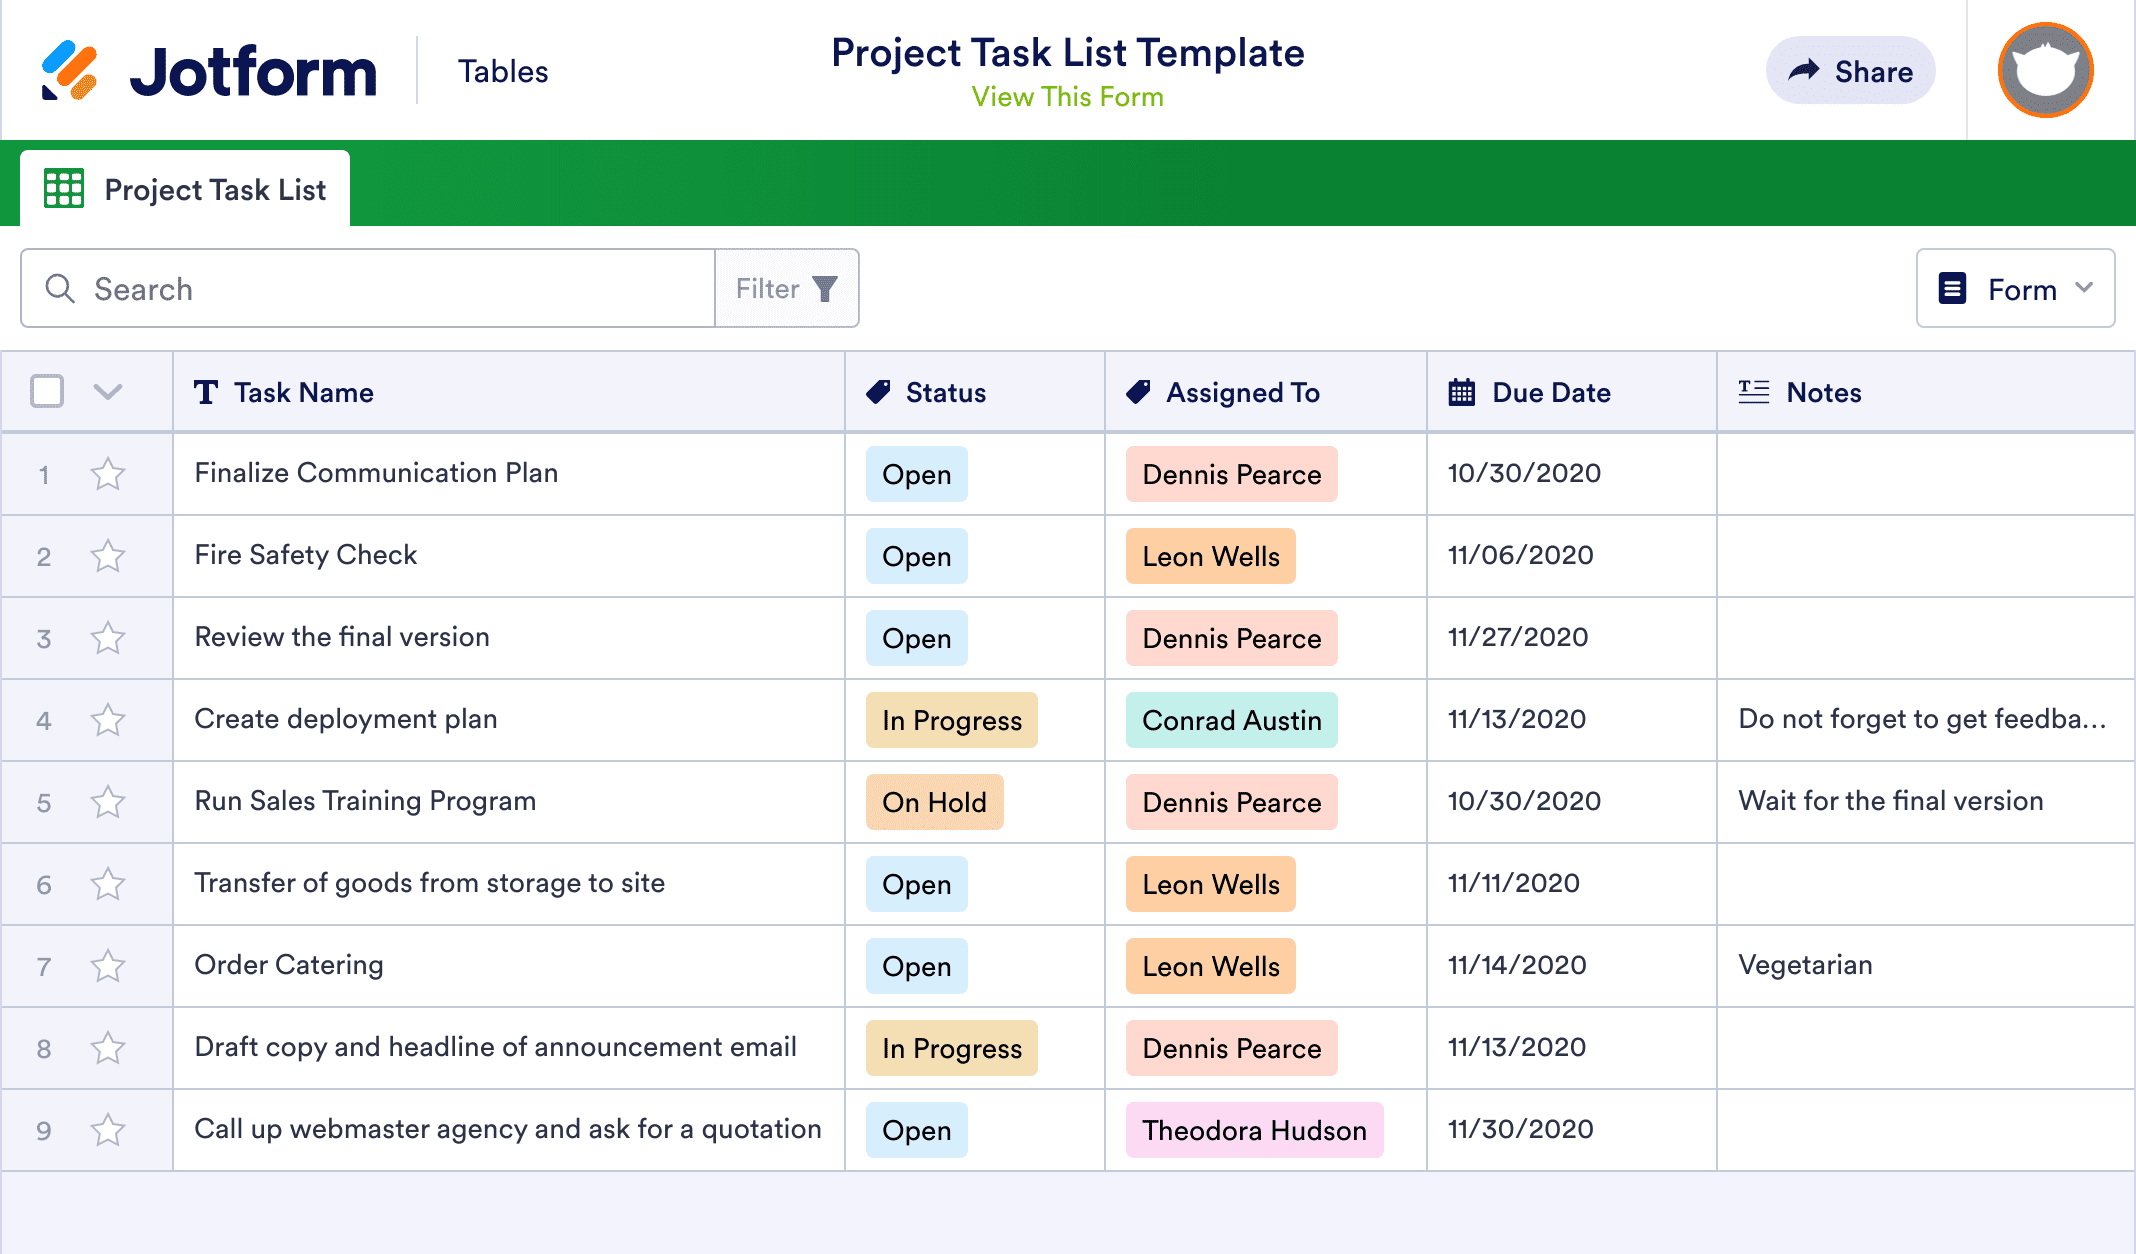 Project Task List Template